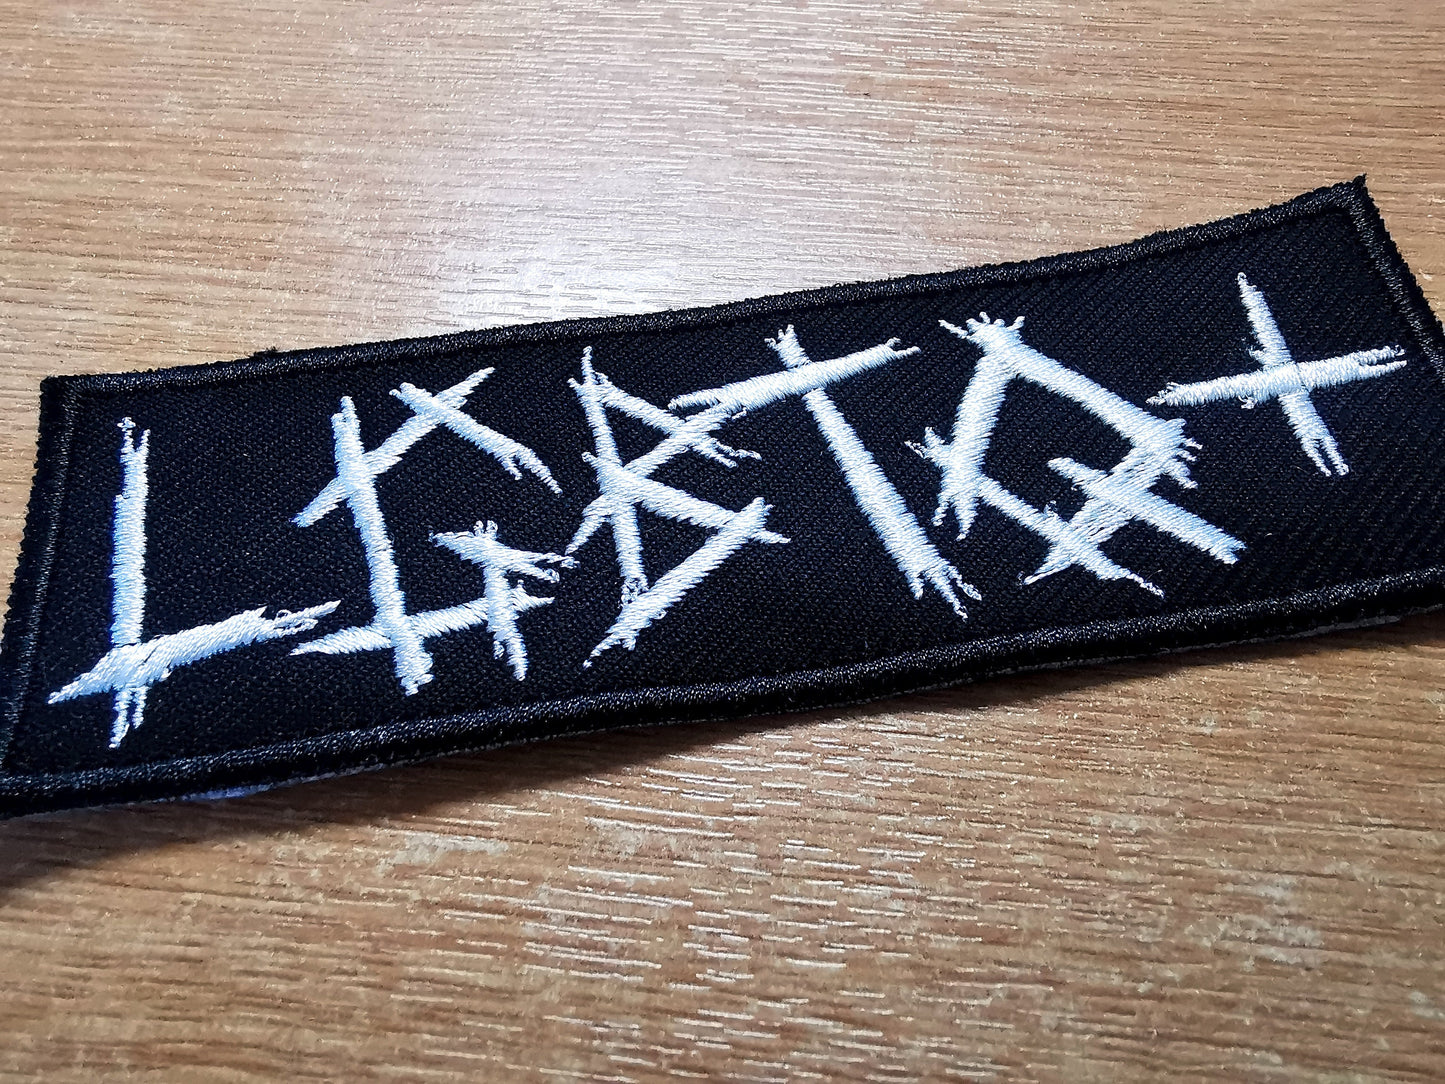 LGBTQ+ Black Metal Iron On Patch Pride Embroidered